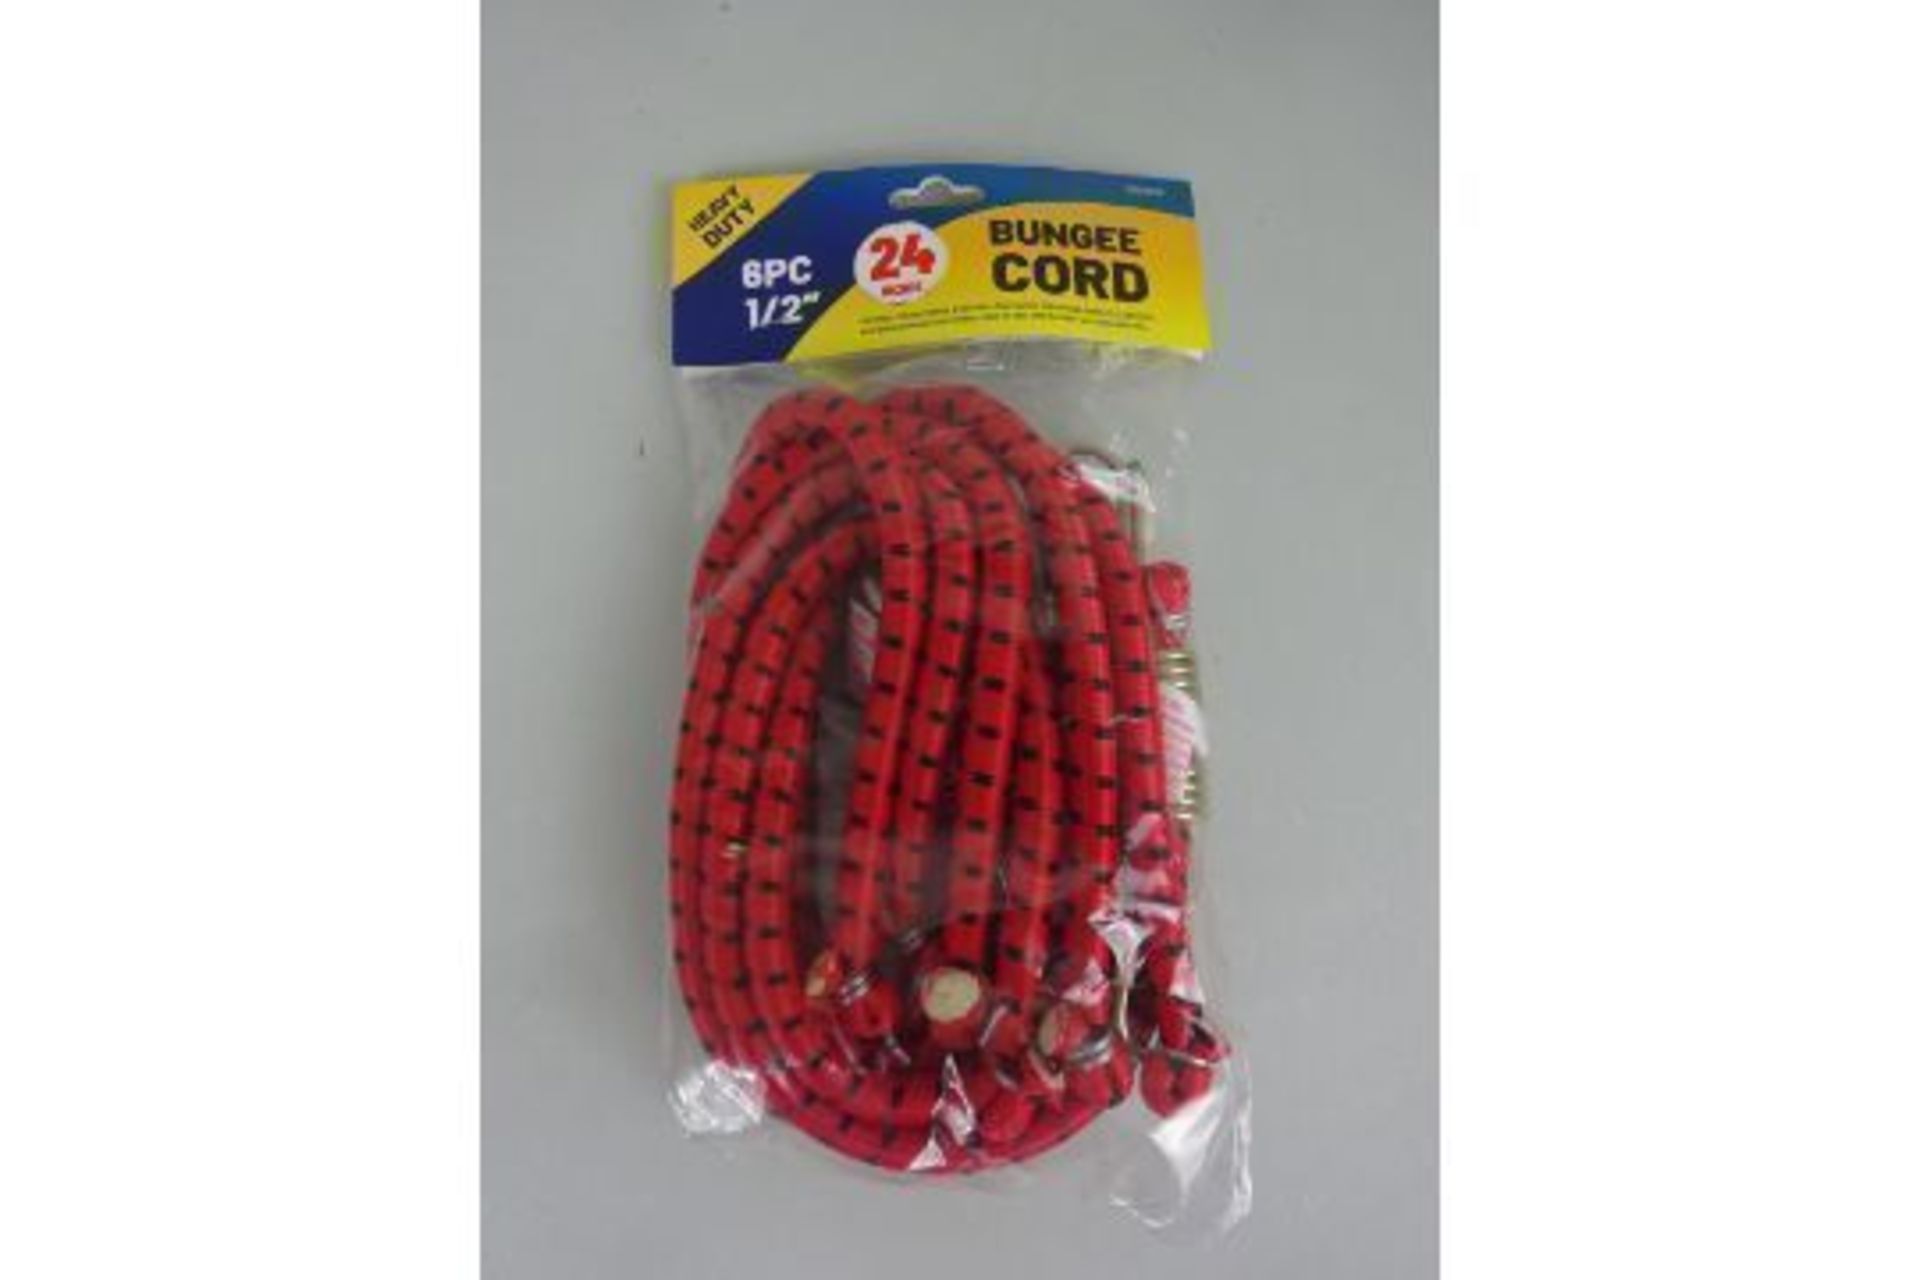 New Packs 6pc Heavy Duty Bungee Cords